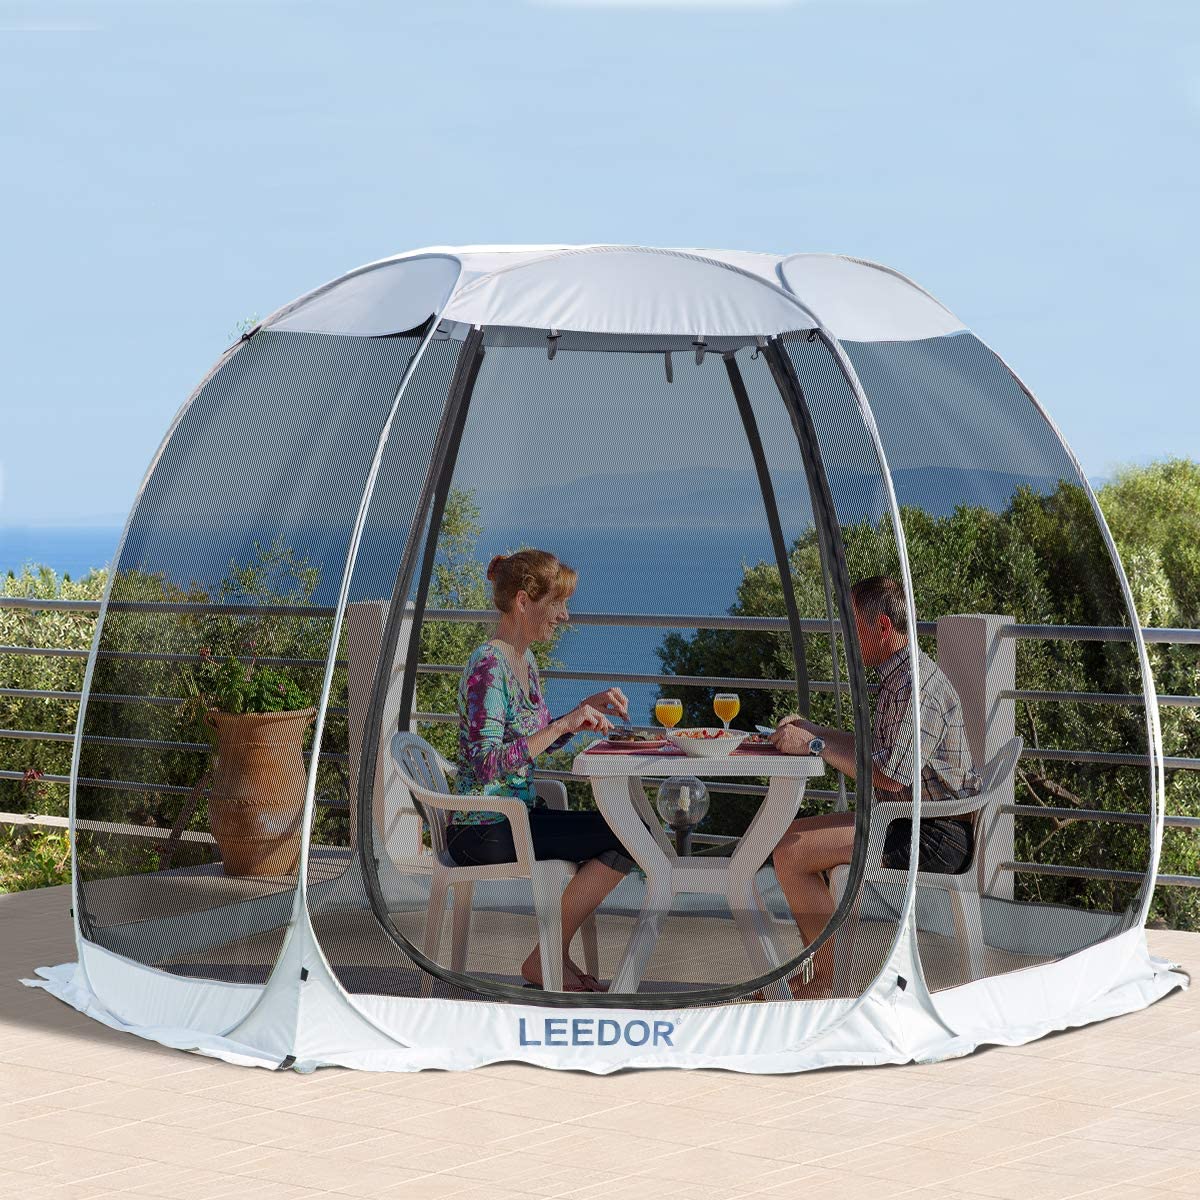 Leedor Gazebos for Patios Screen House Room 4-6 Person Canopy Mosquito Net Camping Tent Dining Pop Up Sun Shade Shelter Mesh Walls Not Waterproof Gray,10'x10' - image 2 of 7